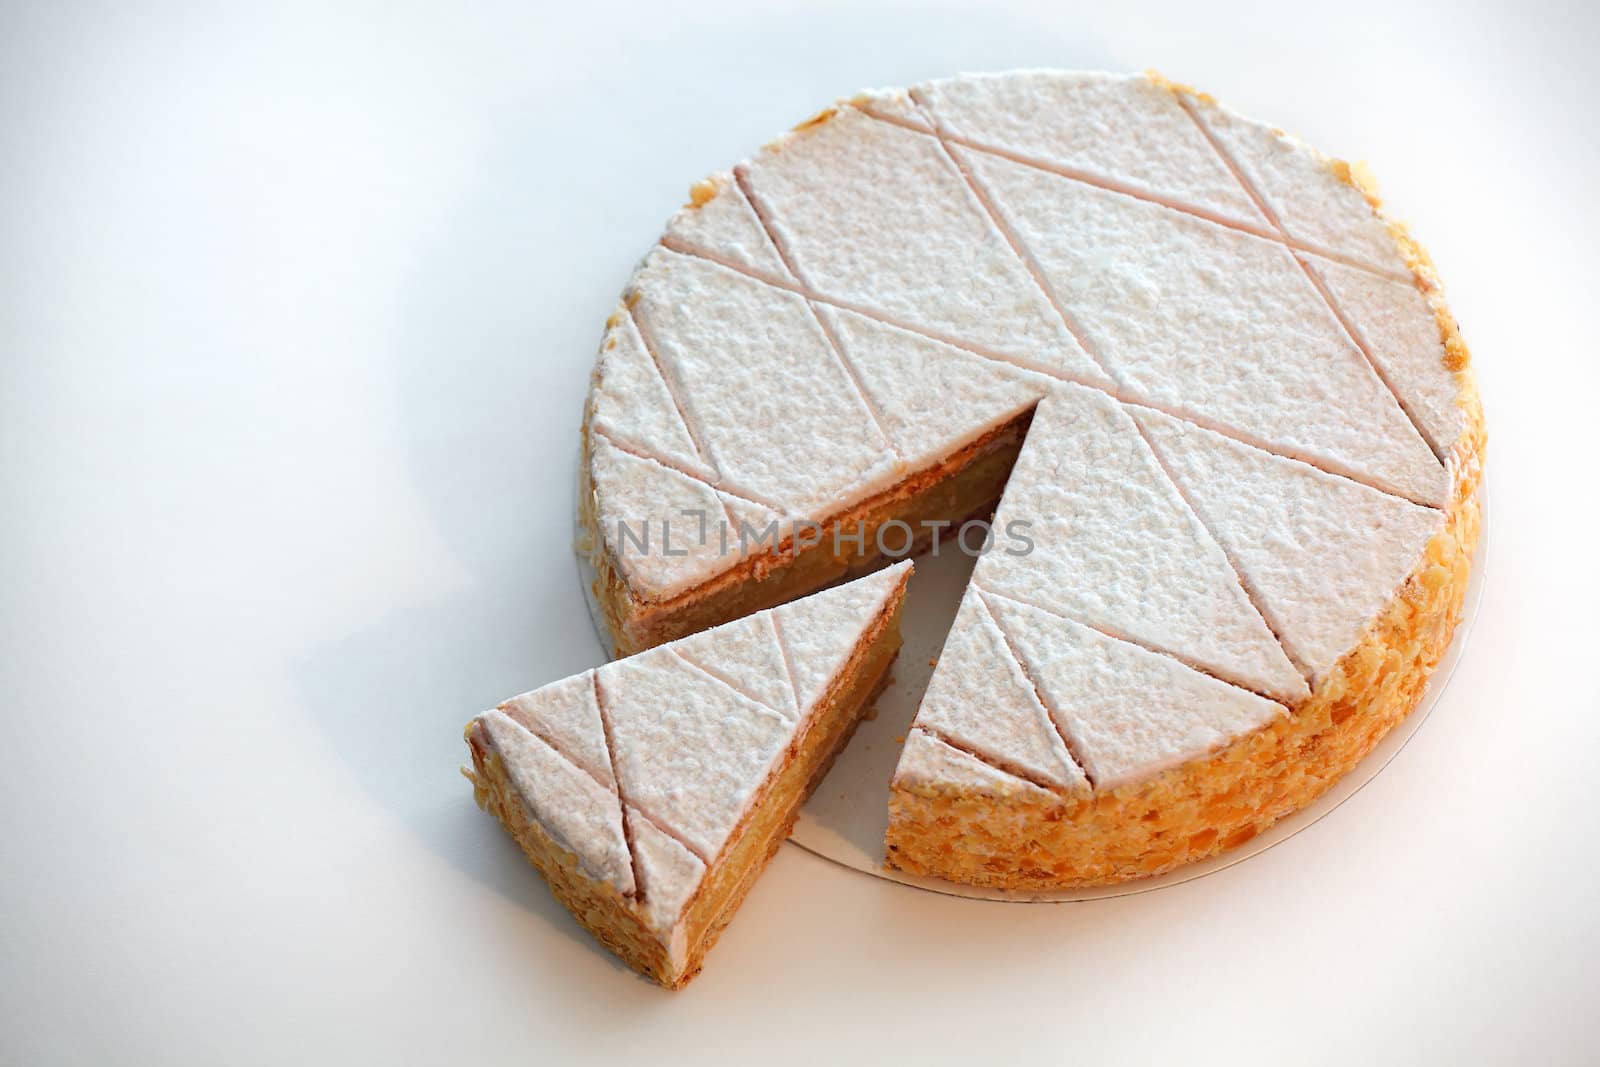 Photo of a traditional Zuger Kirschtorte, or cake made with Kirsch.
